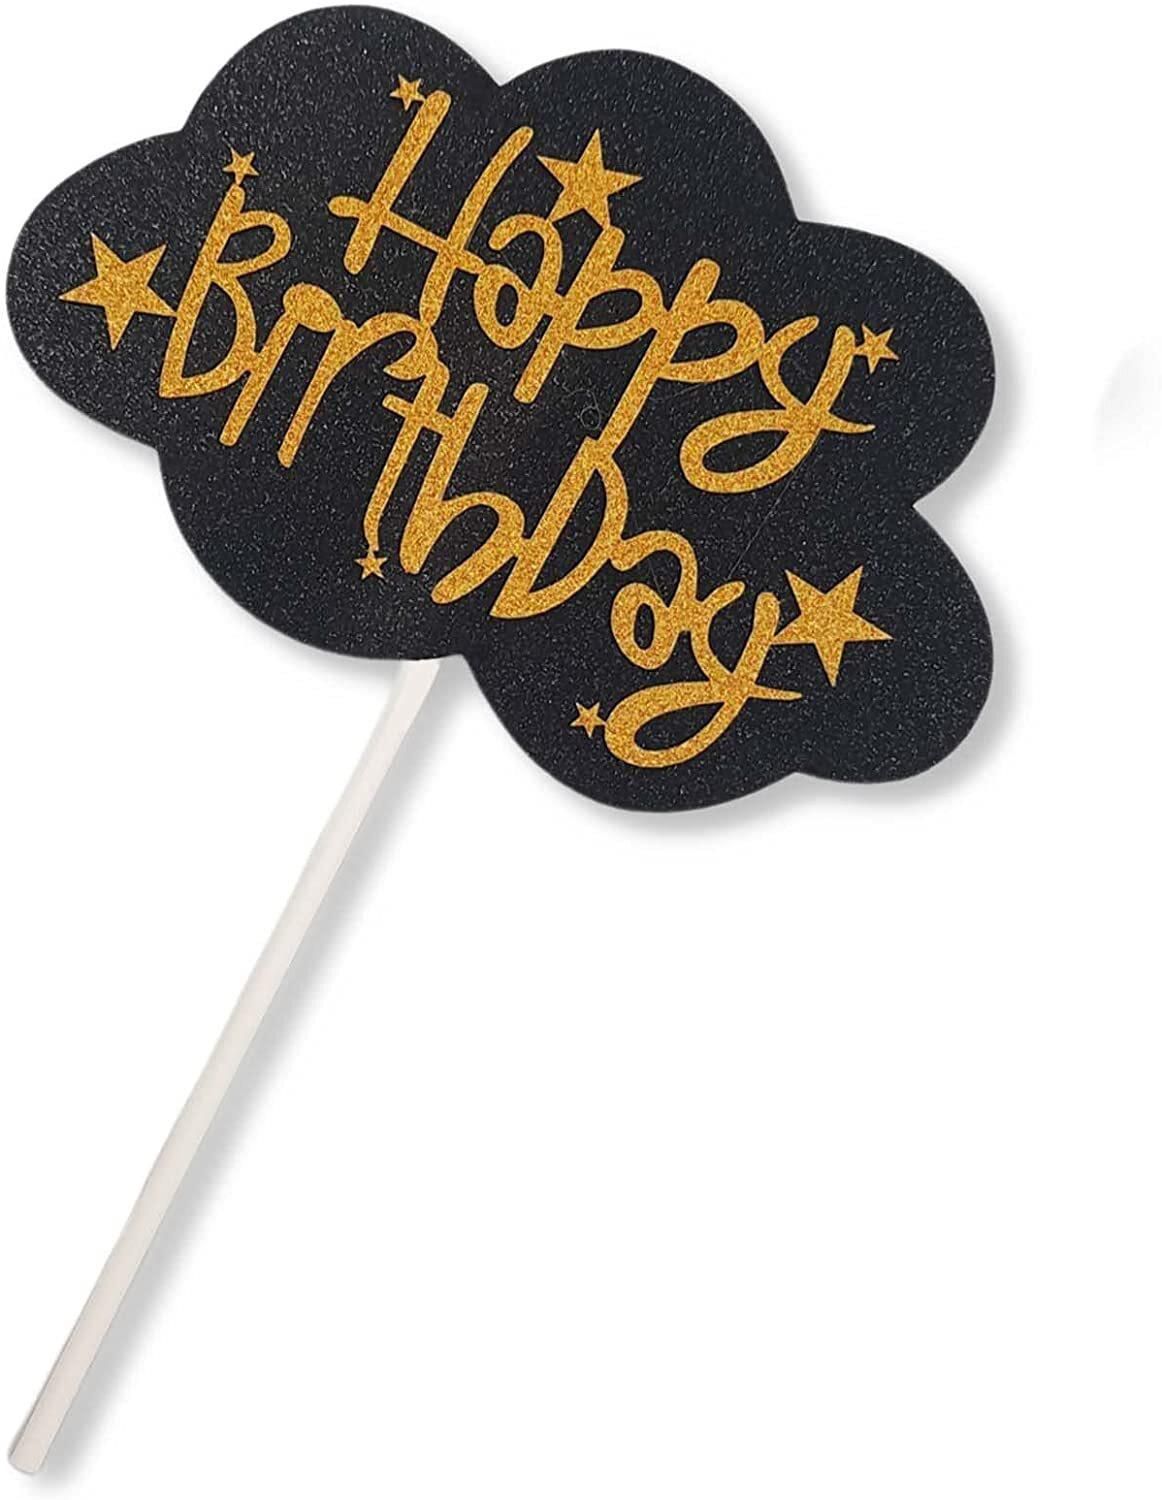 Party Time 1-Piece Glittery Black &amp; Gold Happy Birthday Cake Topper Paper for Birthday Decoration, Happy Birthday Cake Decorations - Party Supplies